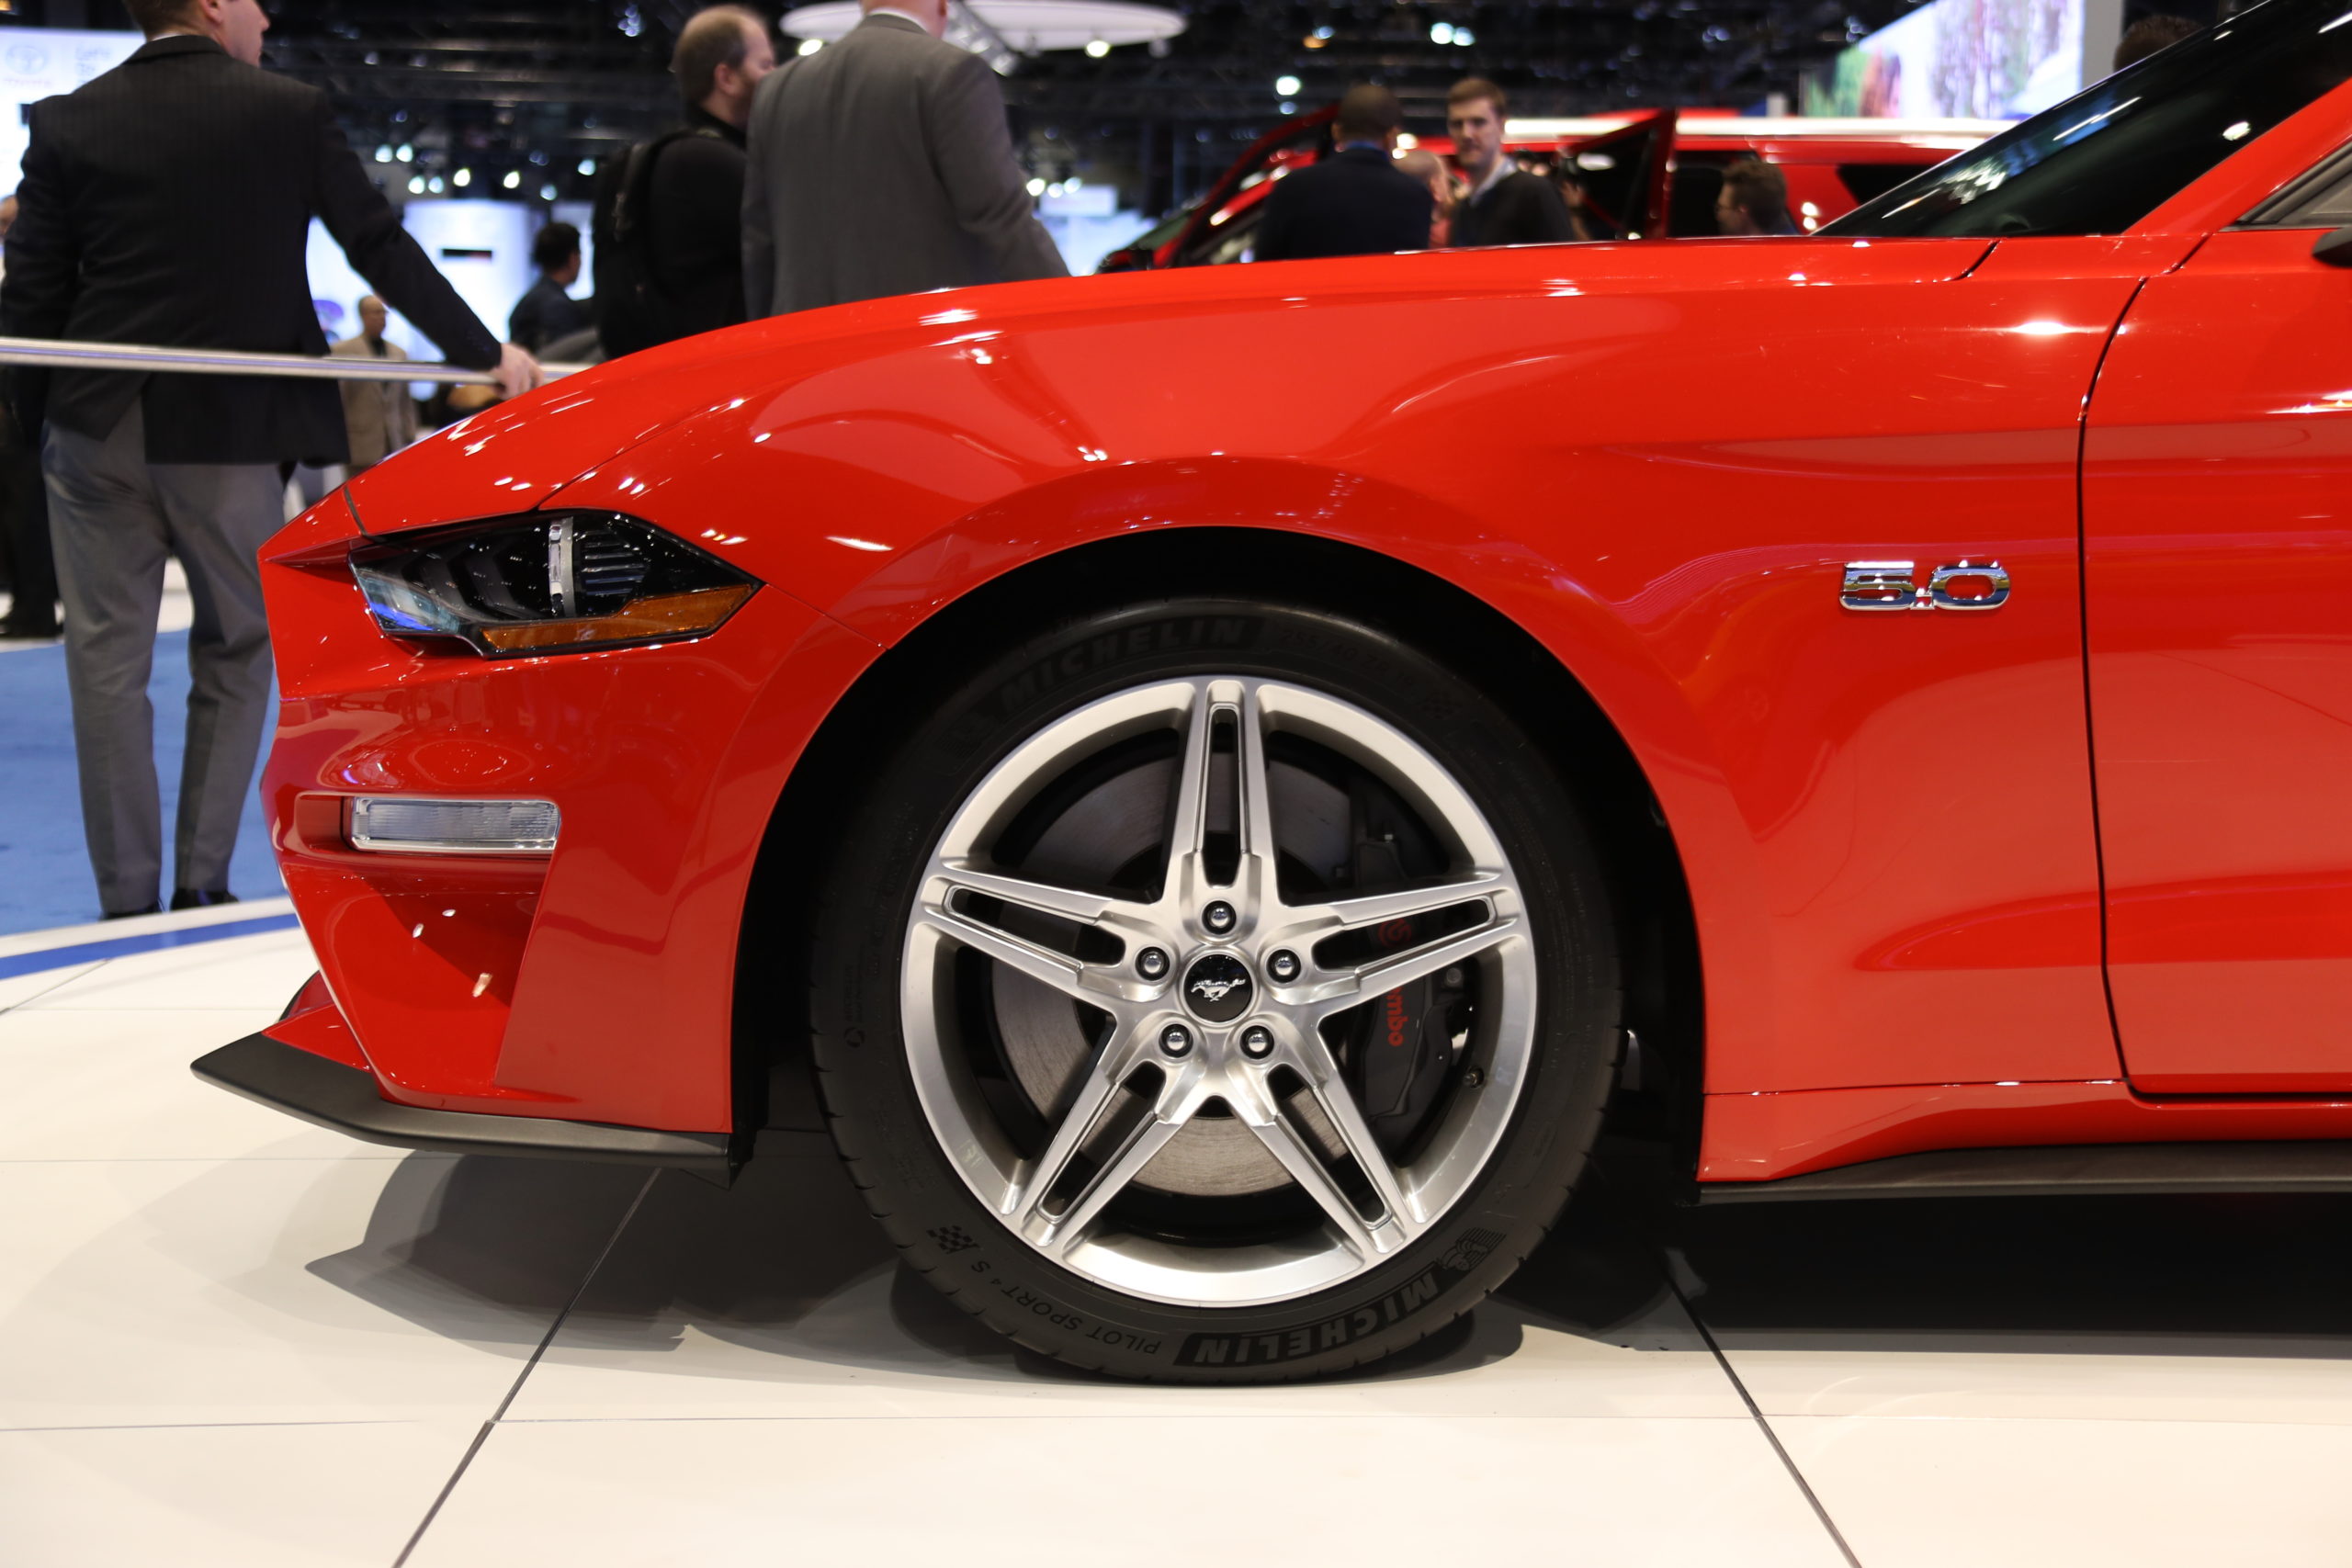 Stare At The 2018 Ford Mustang And Decide If It’s An Improvement